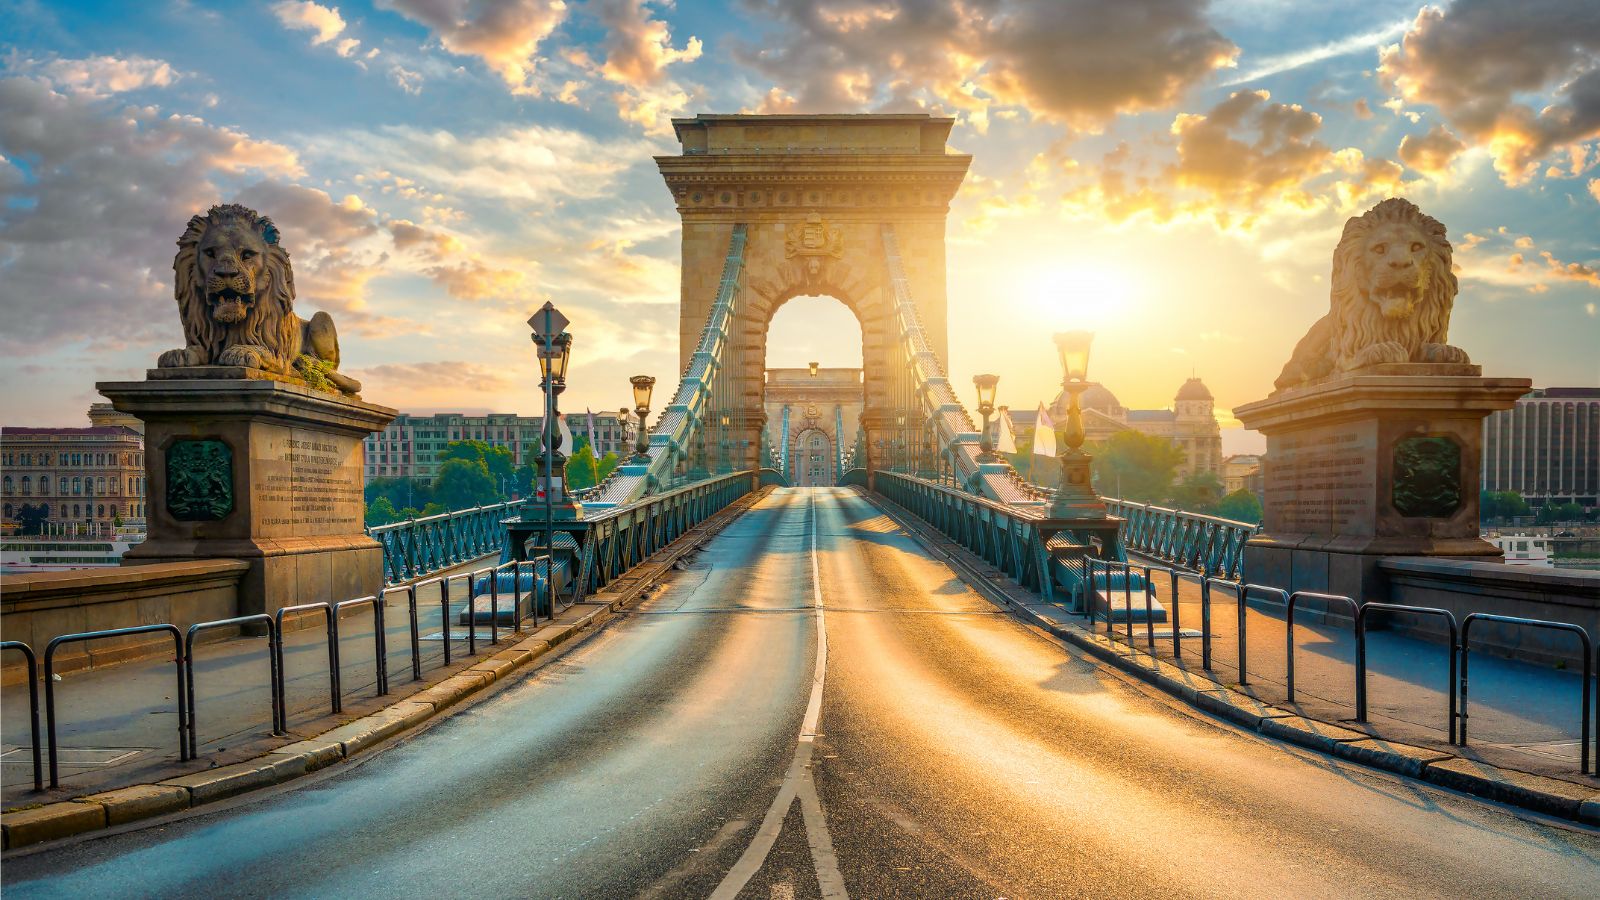 Business Investment Opportunities In Hungary: Get Active Investor Visa